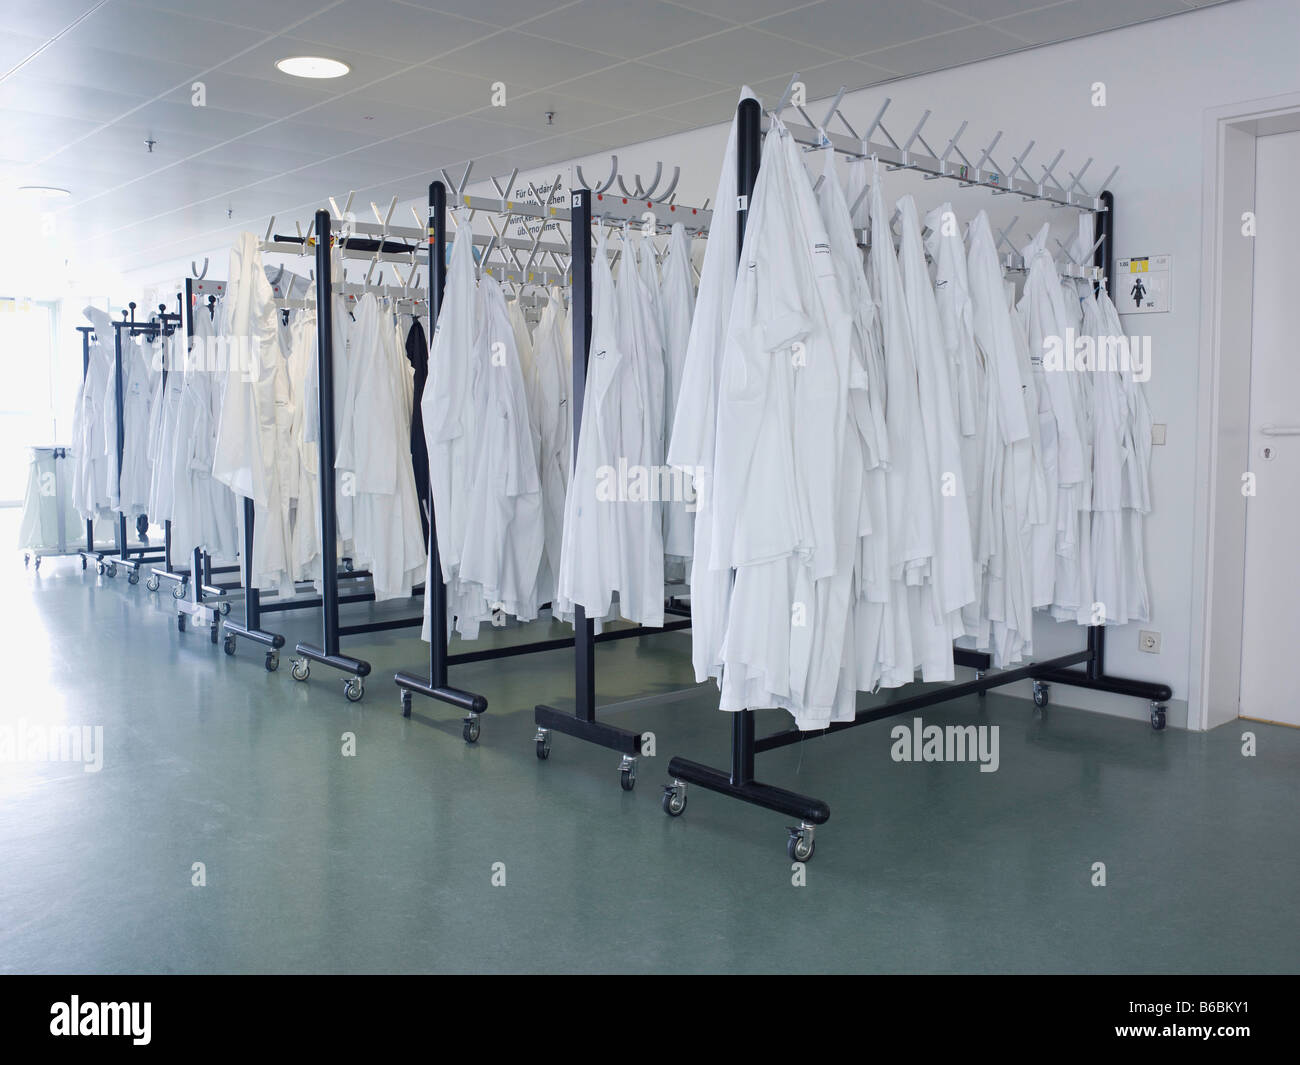 Clothes hanging on hangers Stock Photo